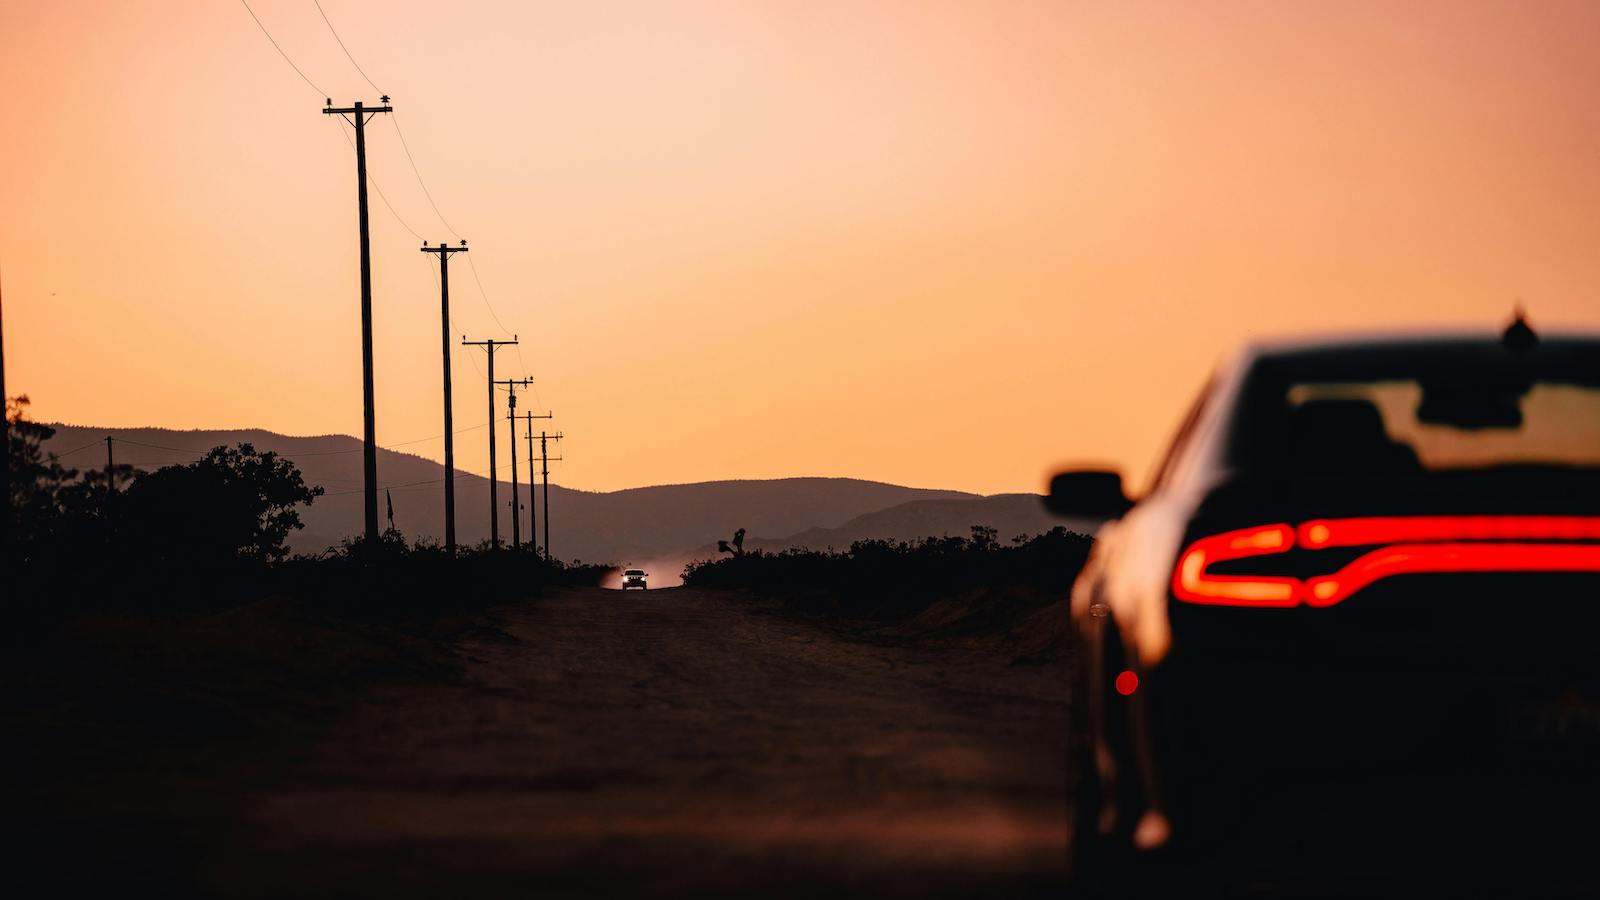 Defocused Photo of a Car on a Dirt Road with Silhouetted Mountains in Distance at Sunset